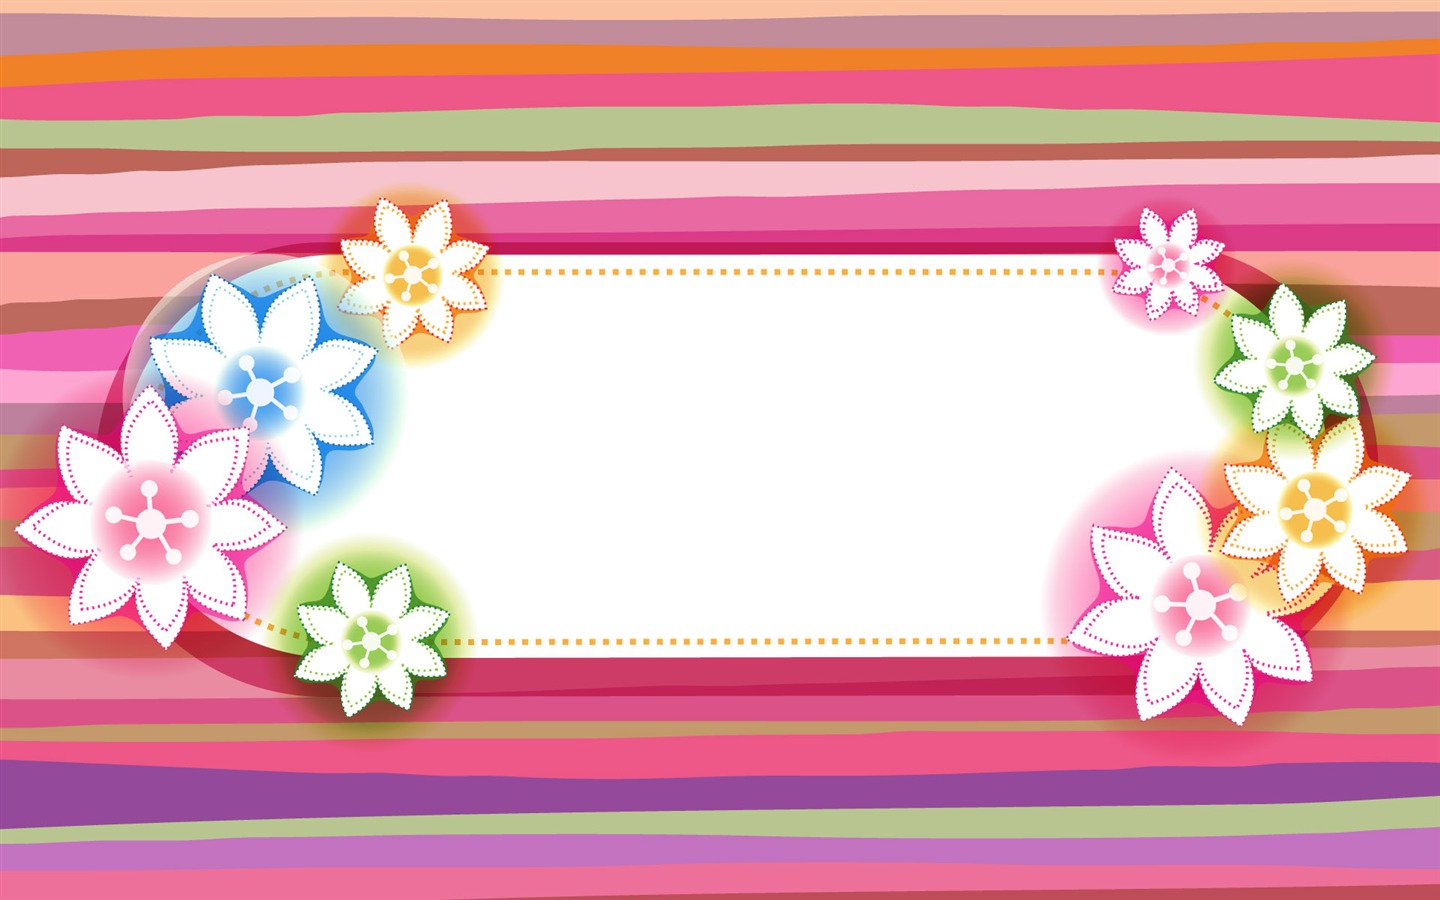 Colorful vector background wallpaper (3) #5 - 1440x900